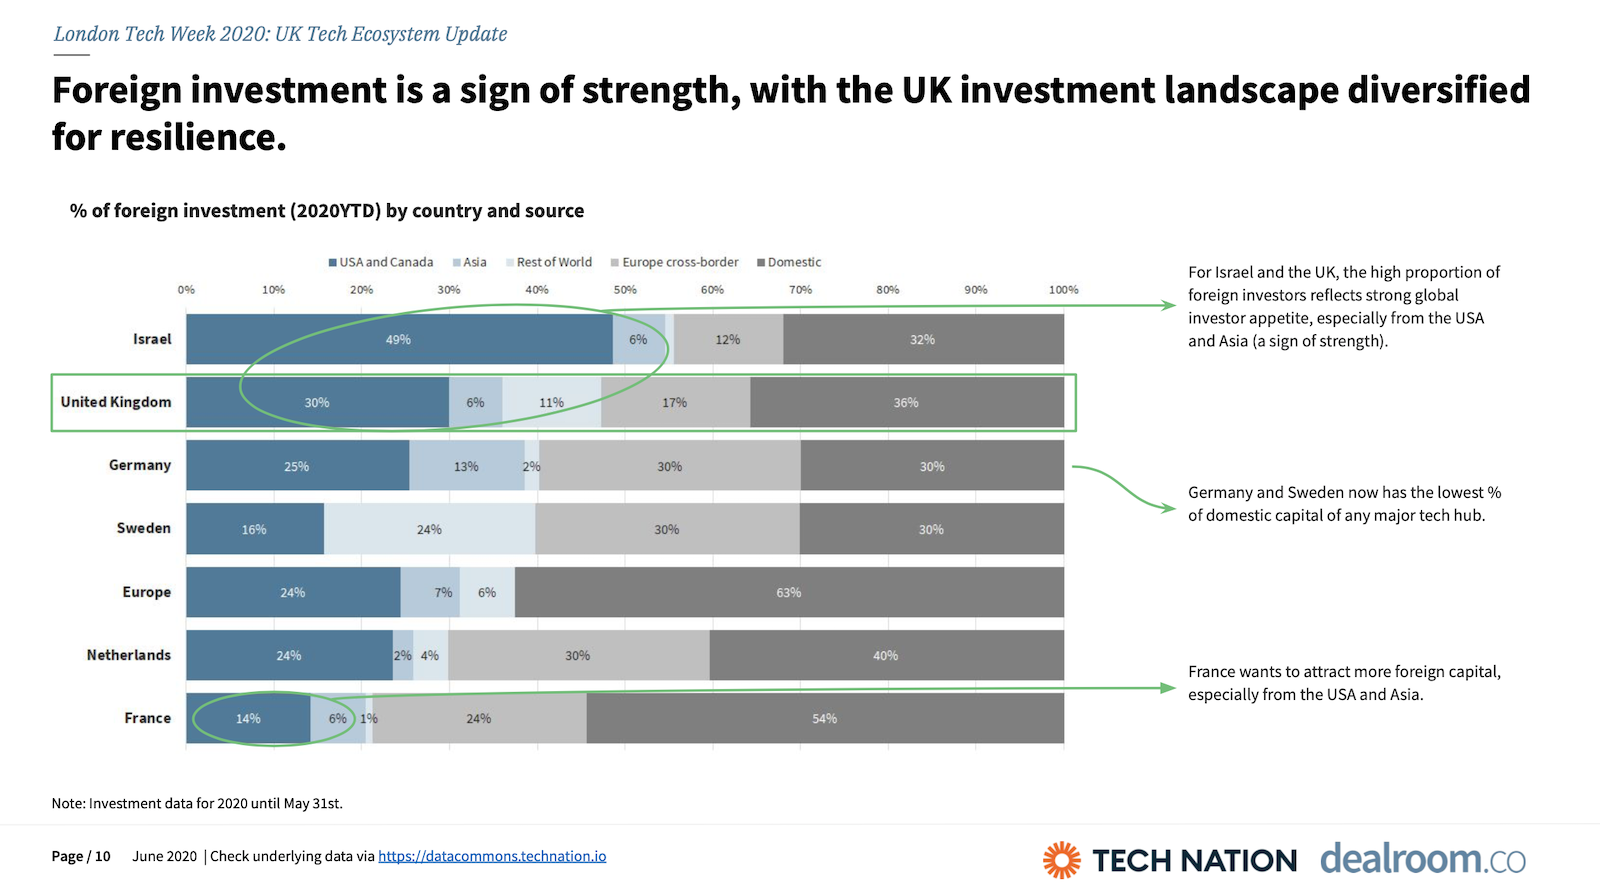 Foreign investment is a sign of strength, with the UK investment landscape diversified for resilience.